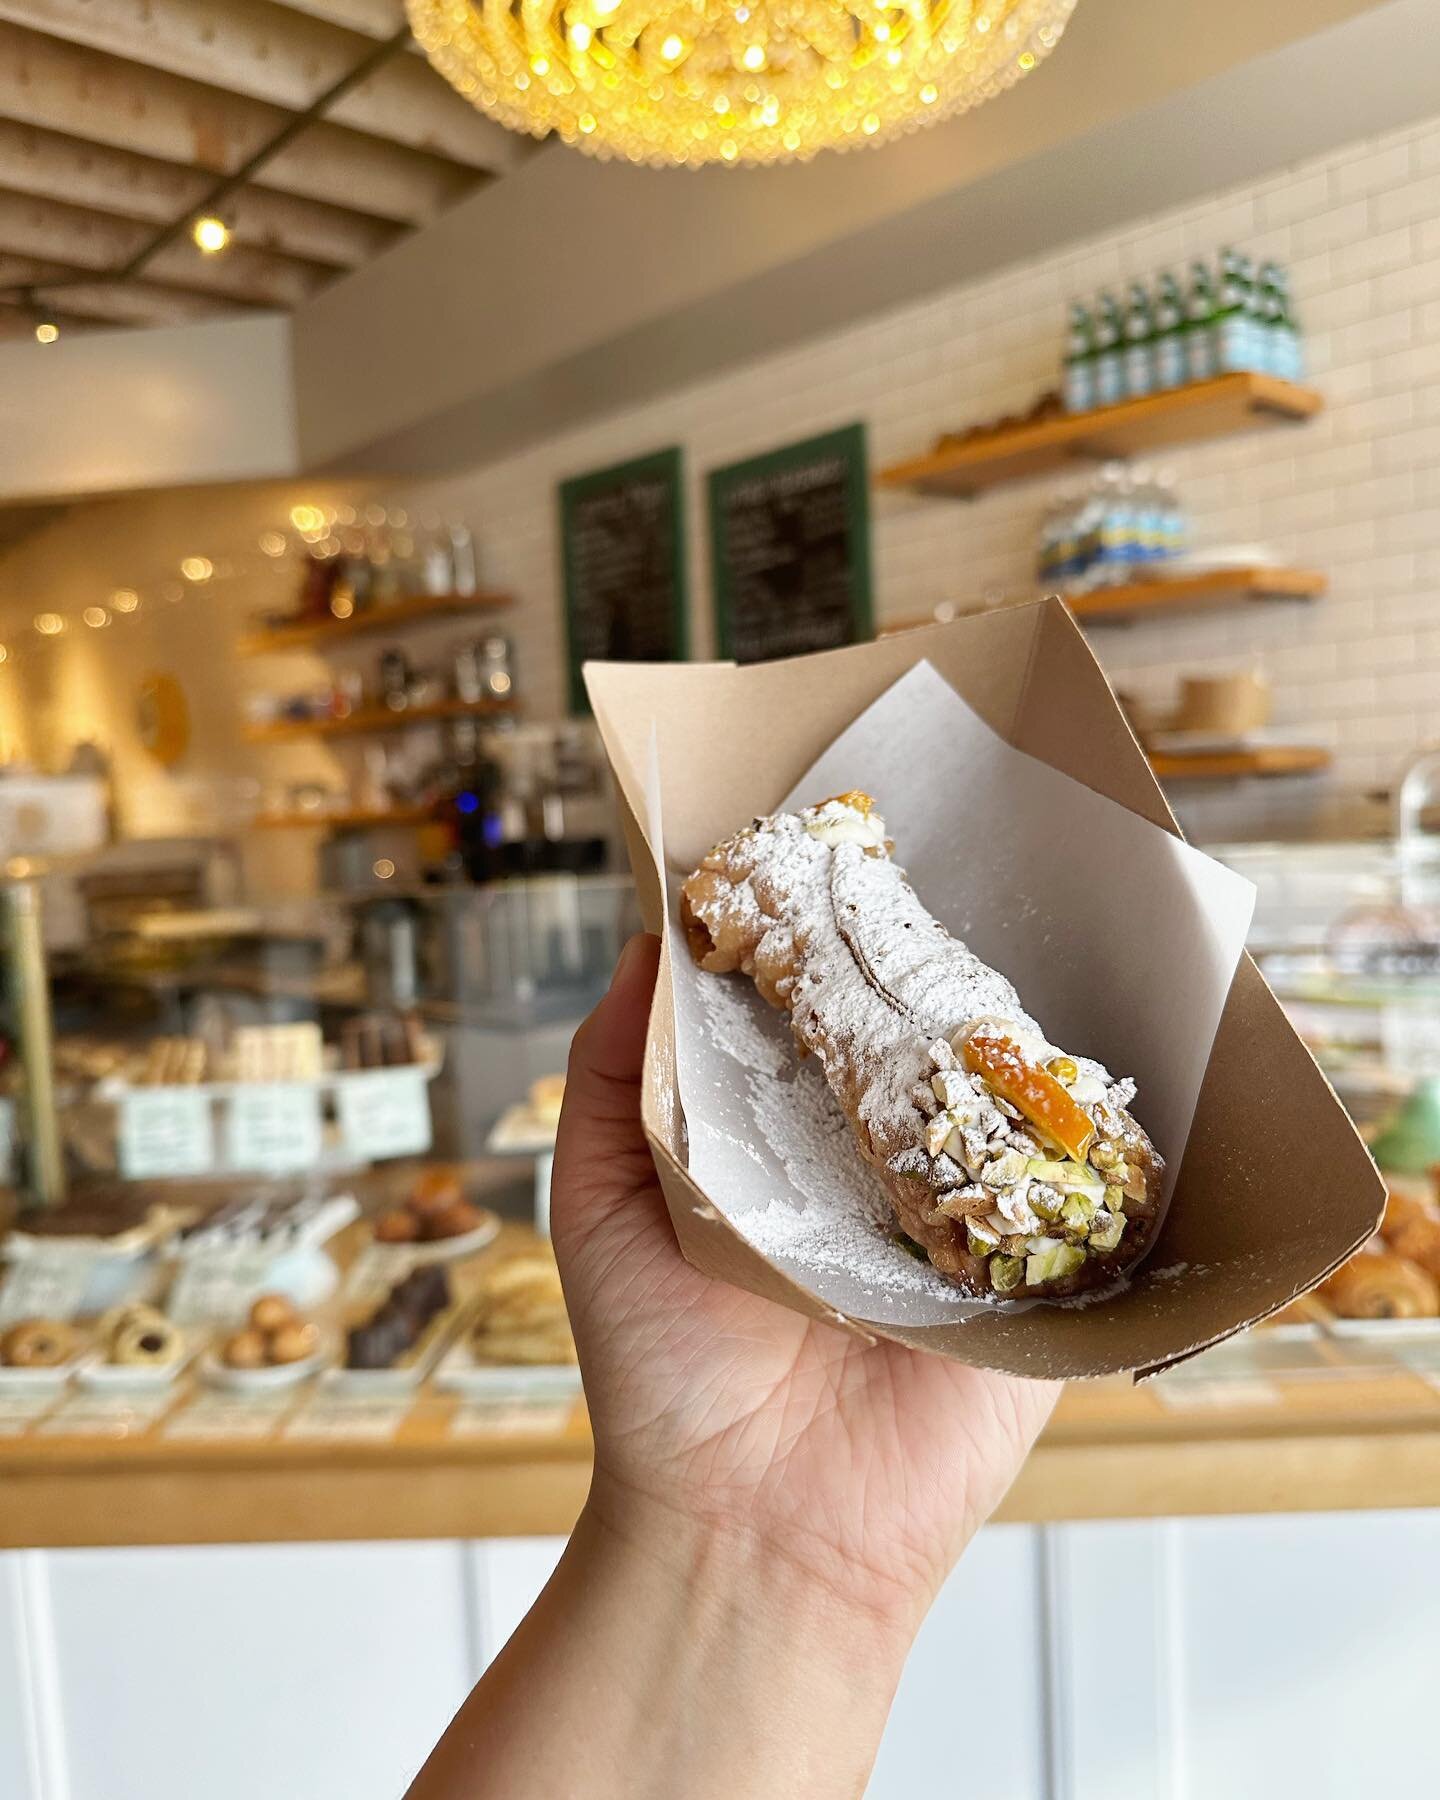 Hey Bakeshop friends! We heard you, today our cannoli are available at the shop. Our bubbly tender shells are filled with a housemade ricotta filling speckled with mini chocolate chips and finished with toasted pistachios, candies orange peel and ple